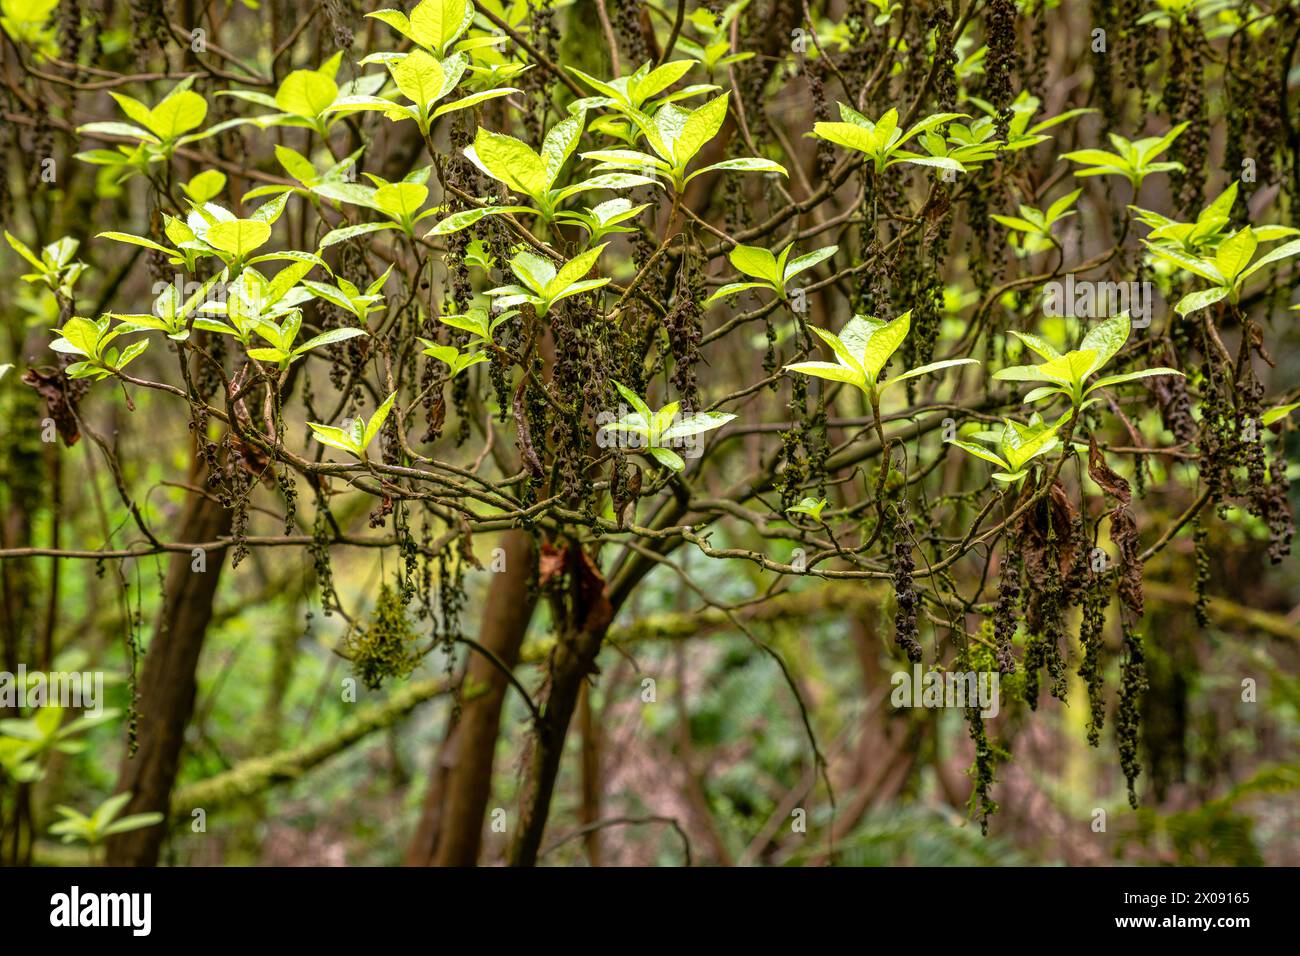 WA25162-00...WASHINGTON - Seeds hanging from branches and new leaf growth at Washington Park Arboretum in Seattle. Stock Photo